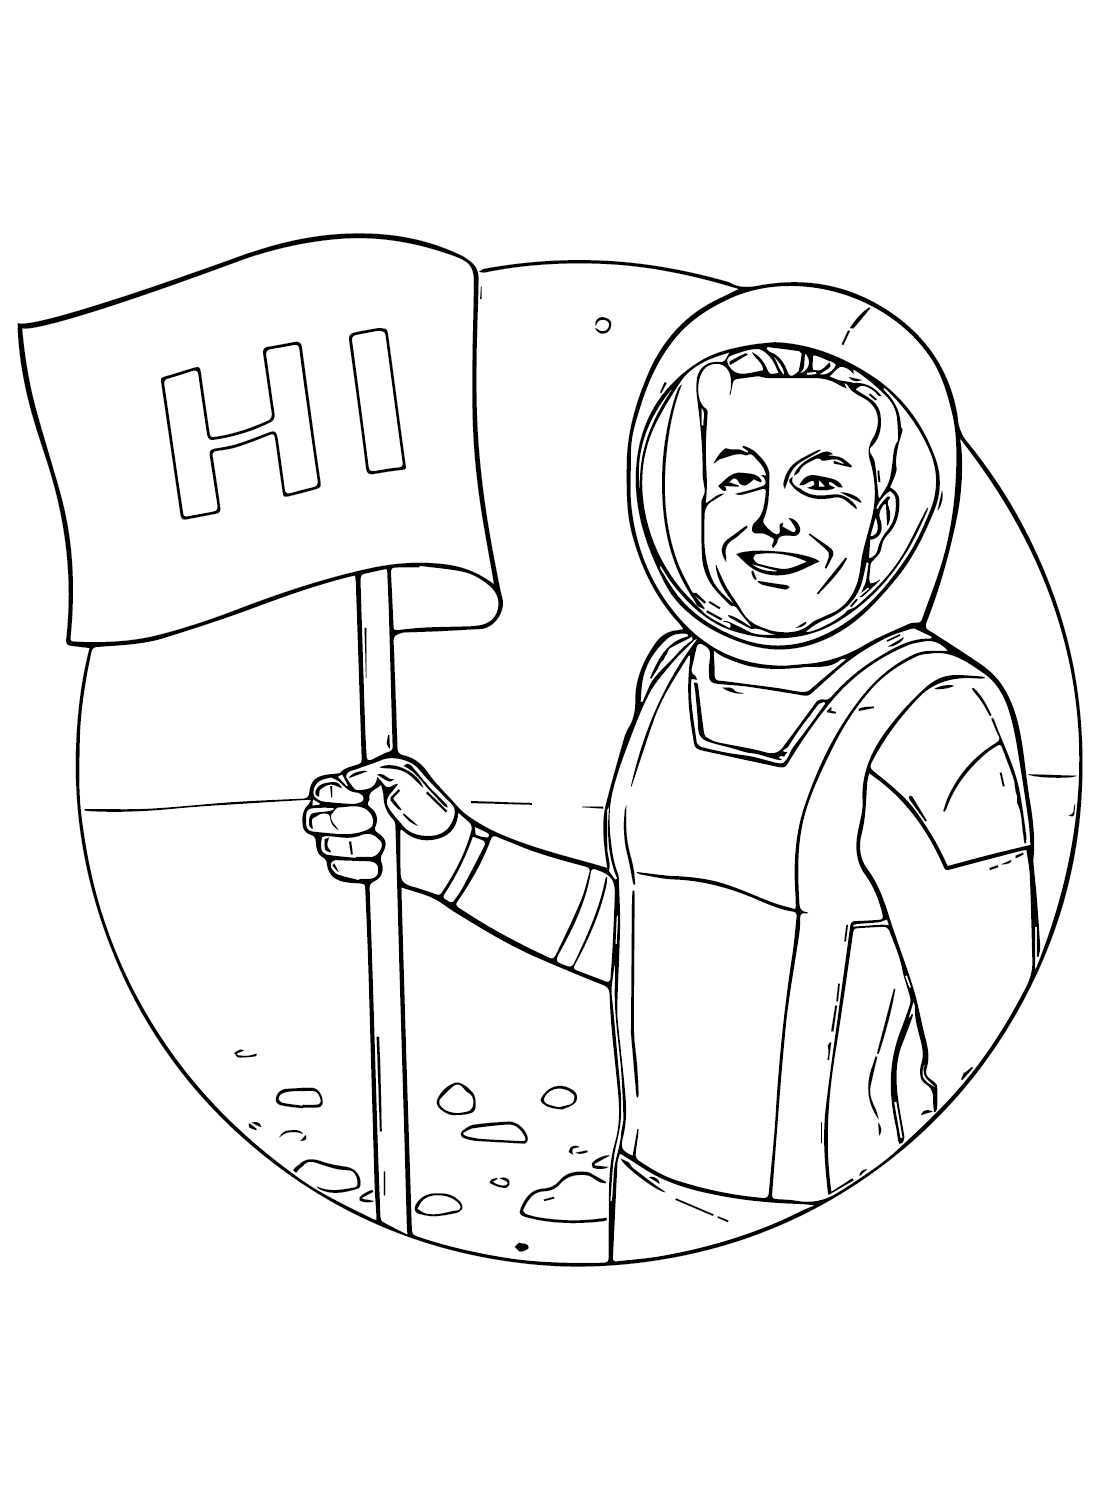 Elon Musk-Astronaut Coloring Page